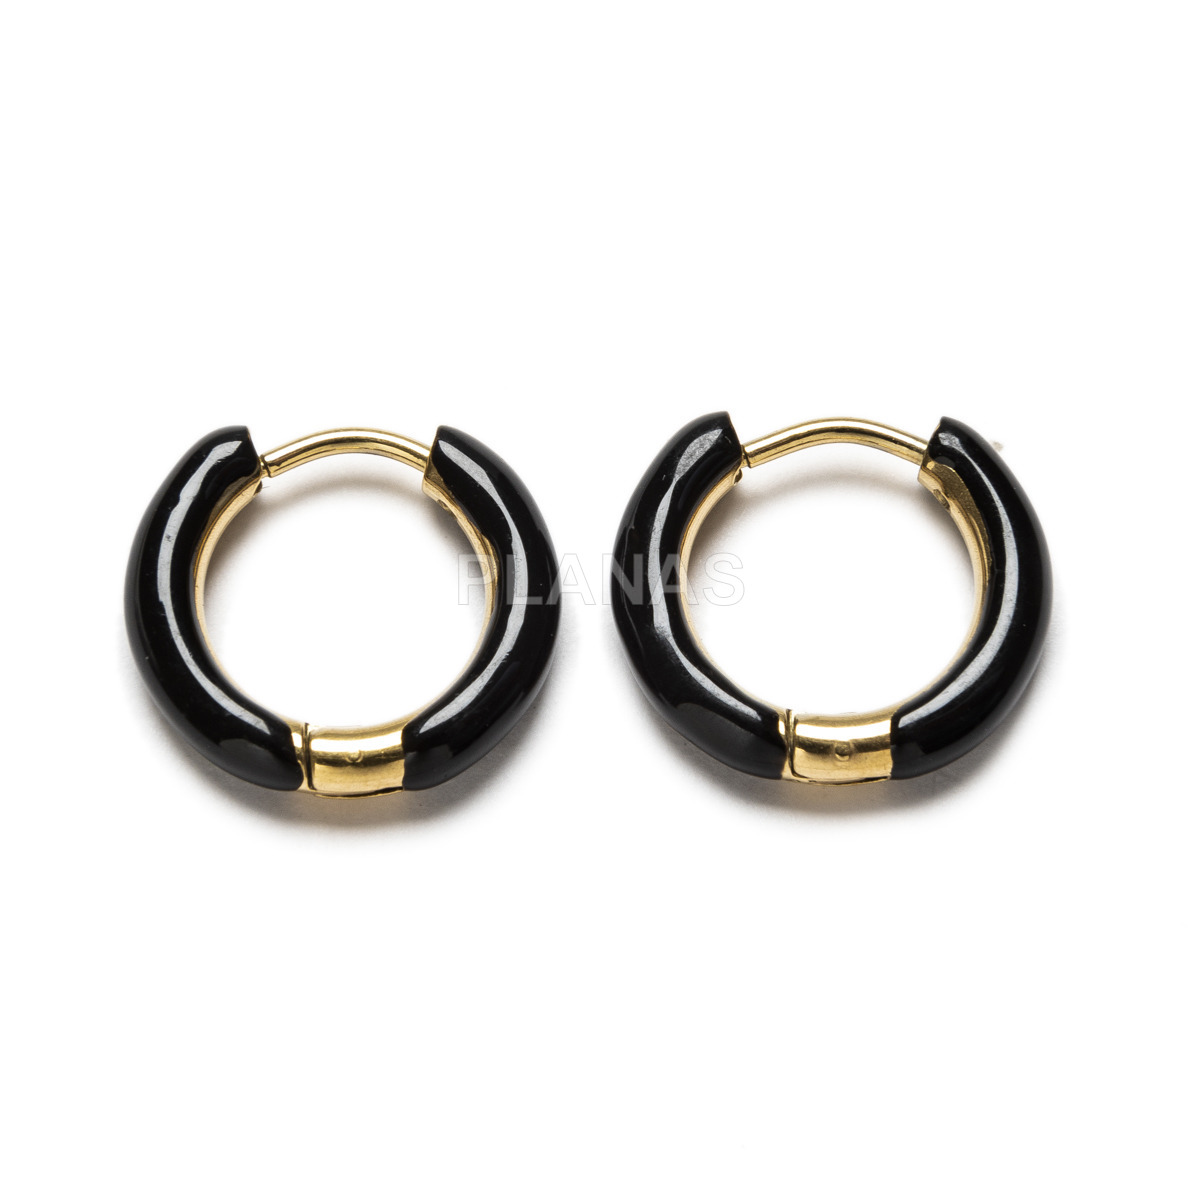 Rings in stainless steel and gold plated with black enamel.